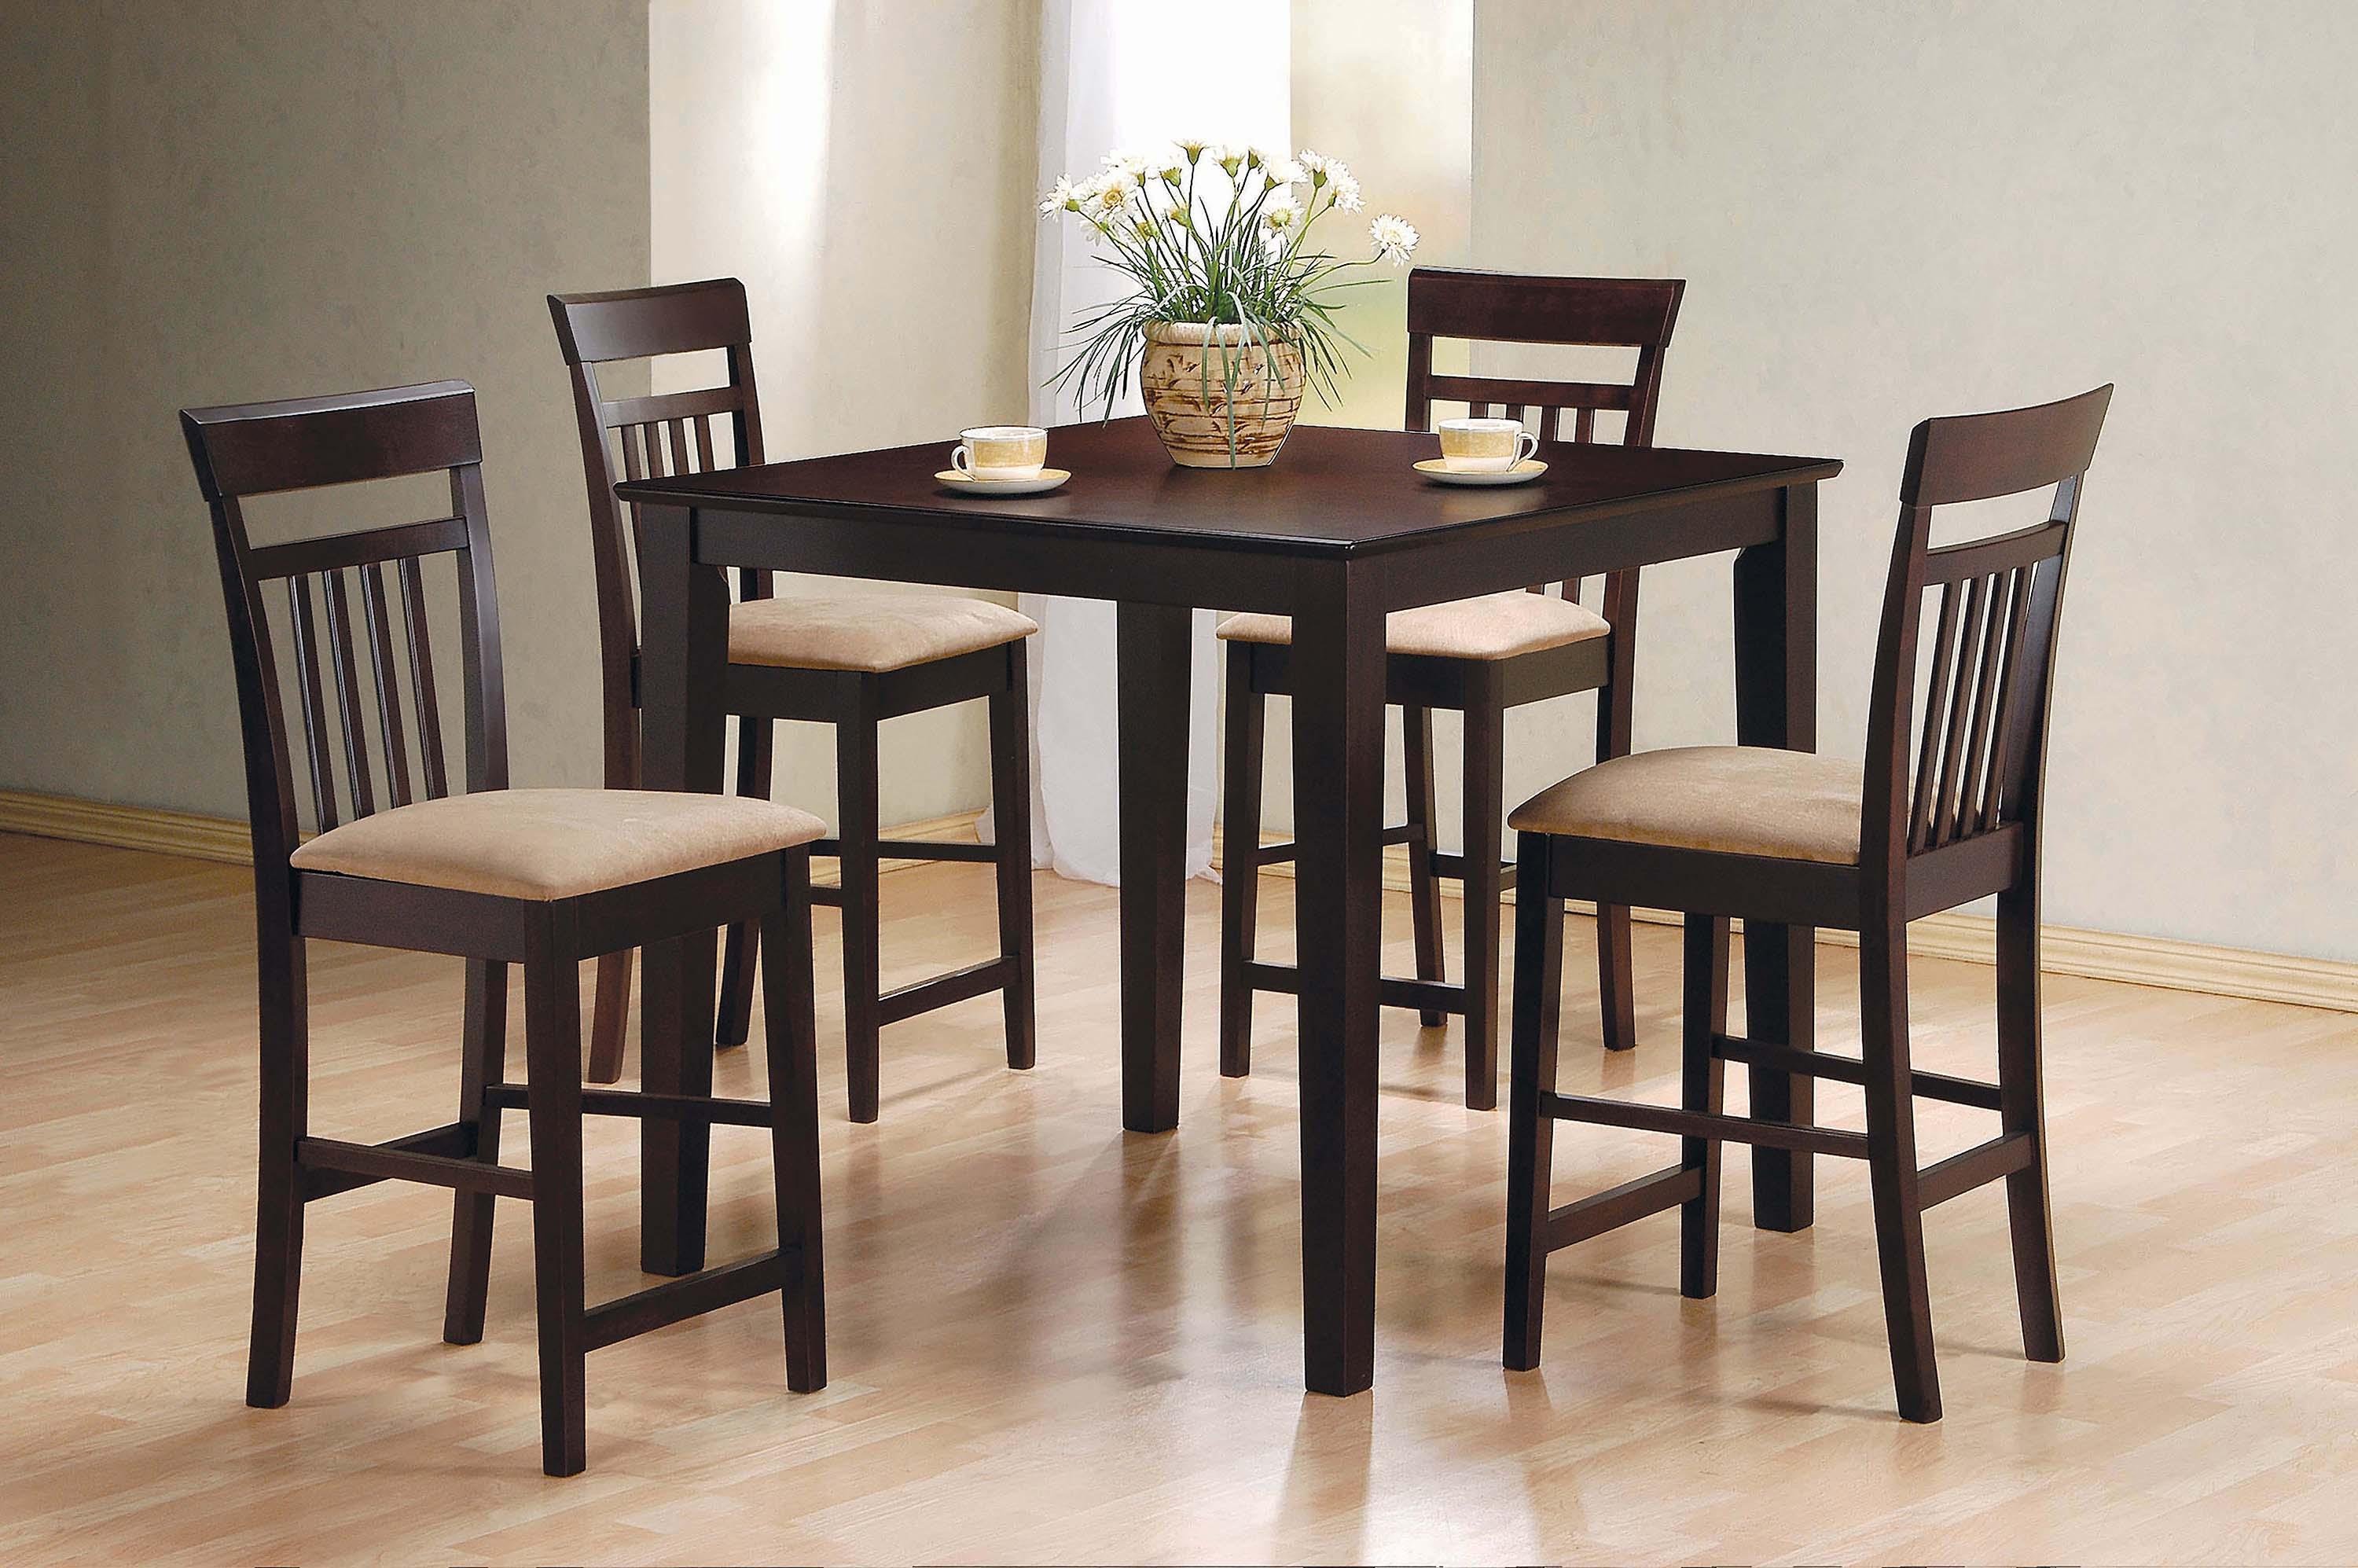 

    
Contemporary Dark Brown Wood & Fabric Dining Set 5 Everyday 150041 by Coaster
